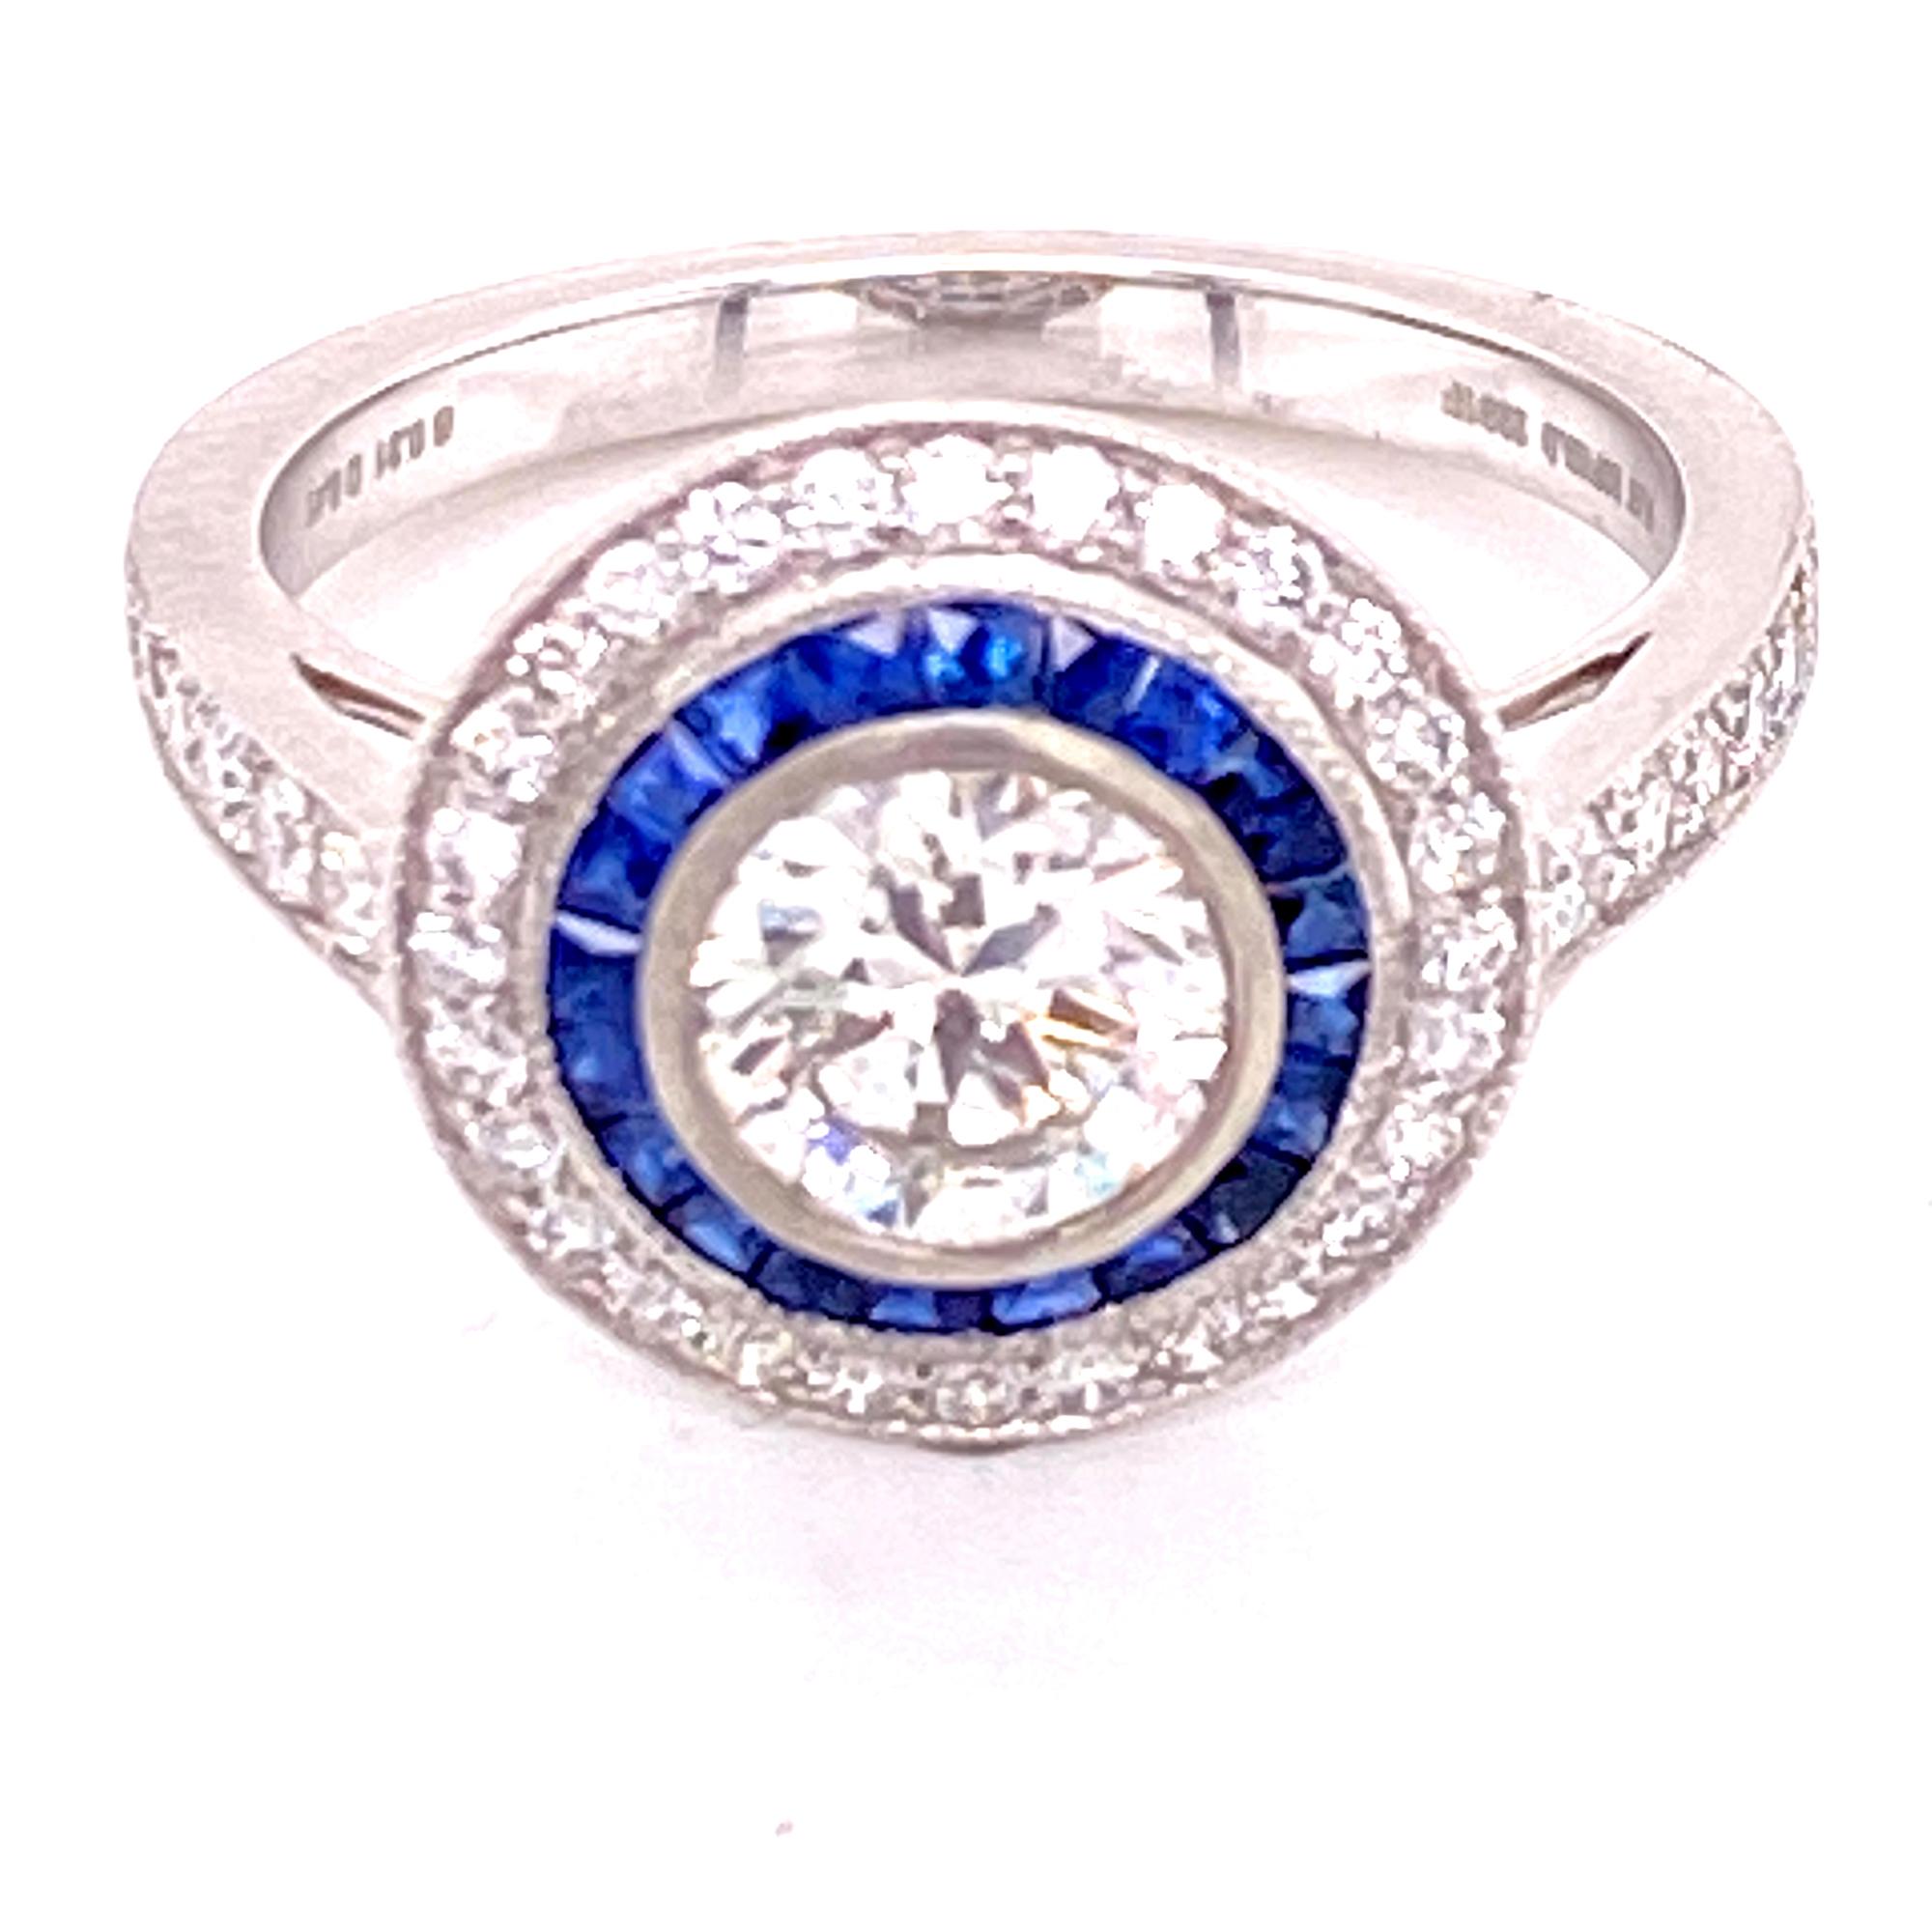 Beautiful Deco Style engagement ring fashioned in platinum. The round briliant cut diamond weighs .82 carats and is graded H color and I1 clarity. The mounting features a halo of blue sapphires surrounded by an outer halo of round brilliant cut